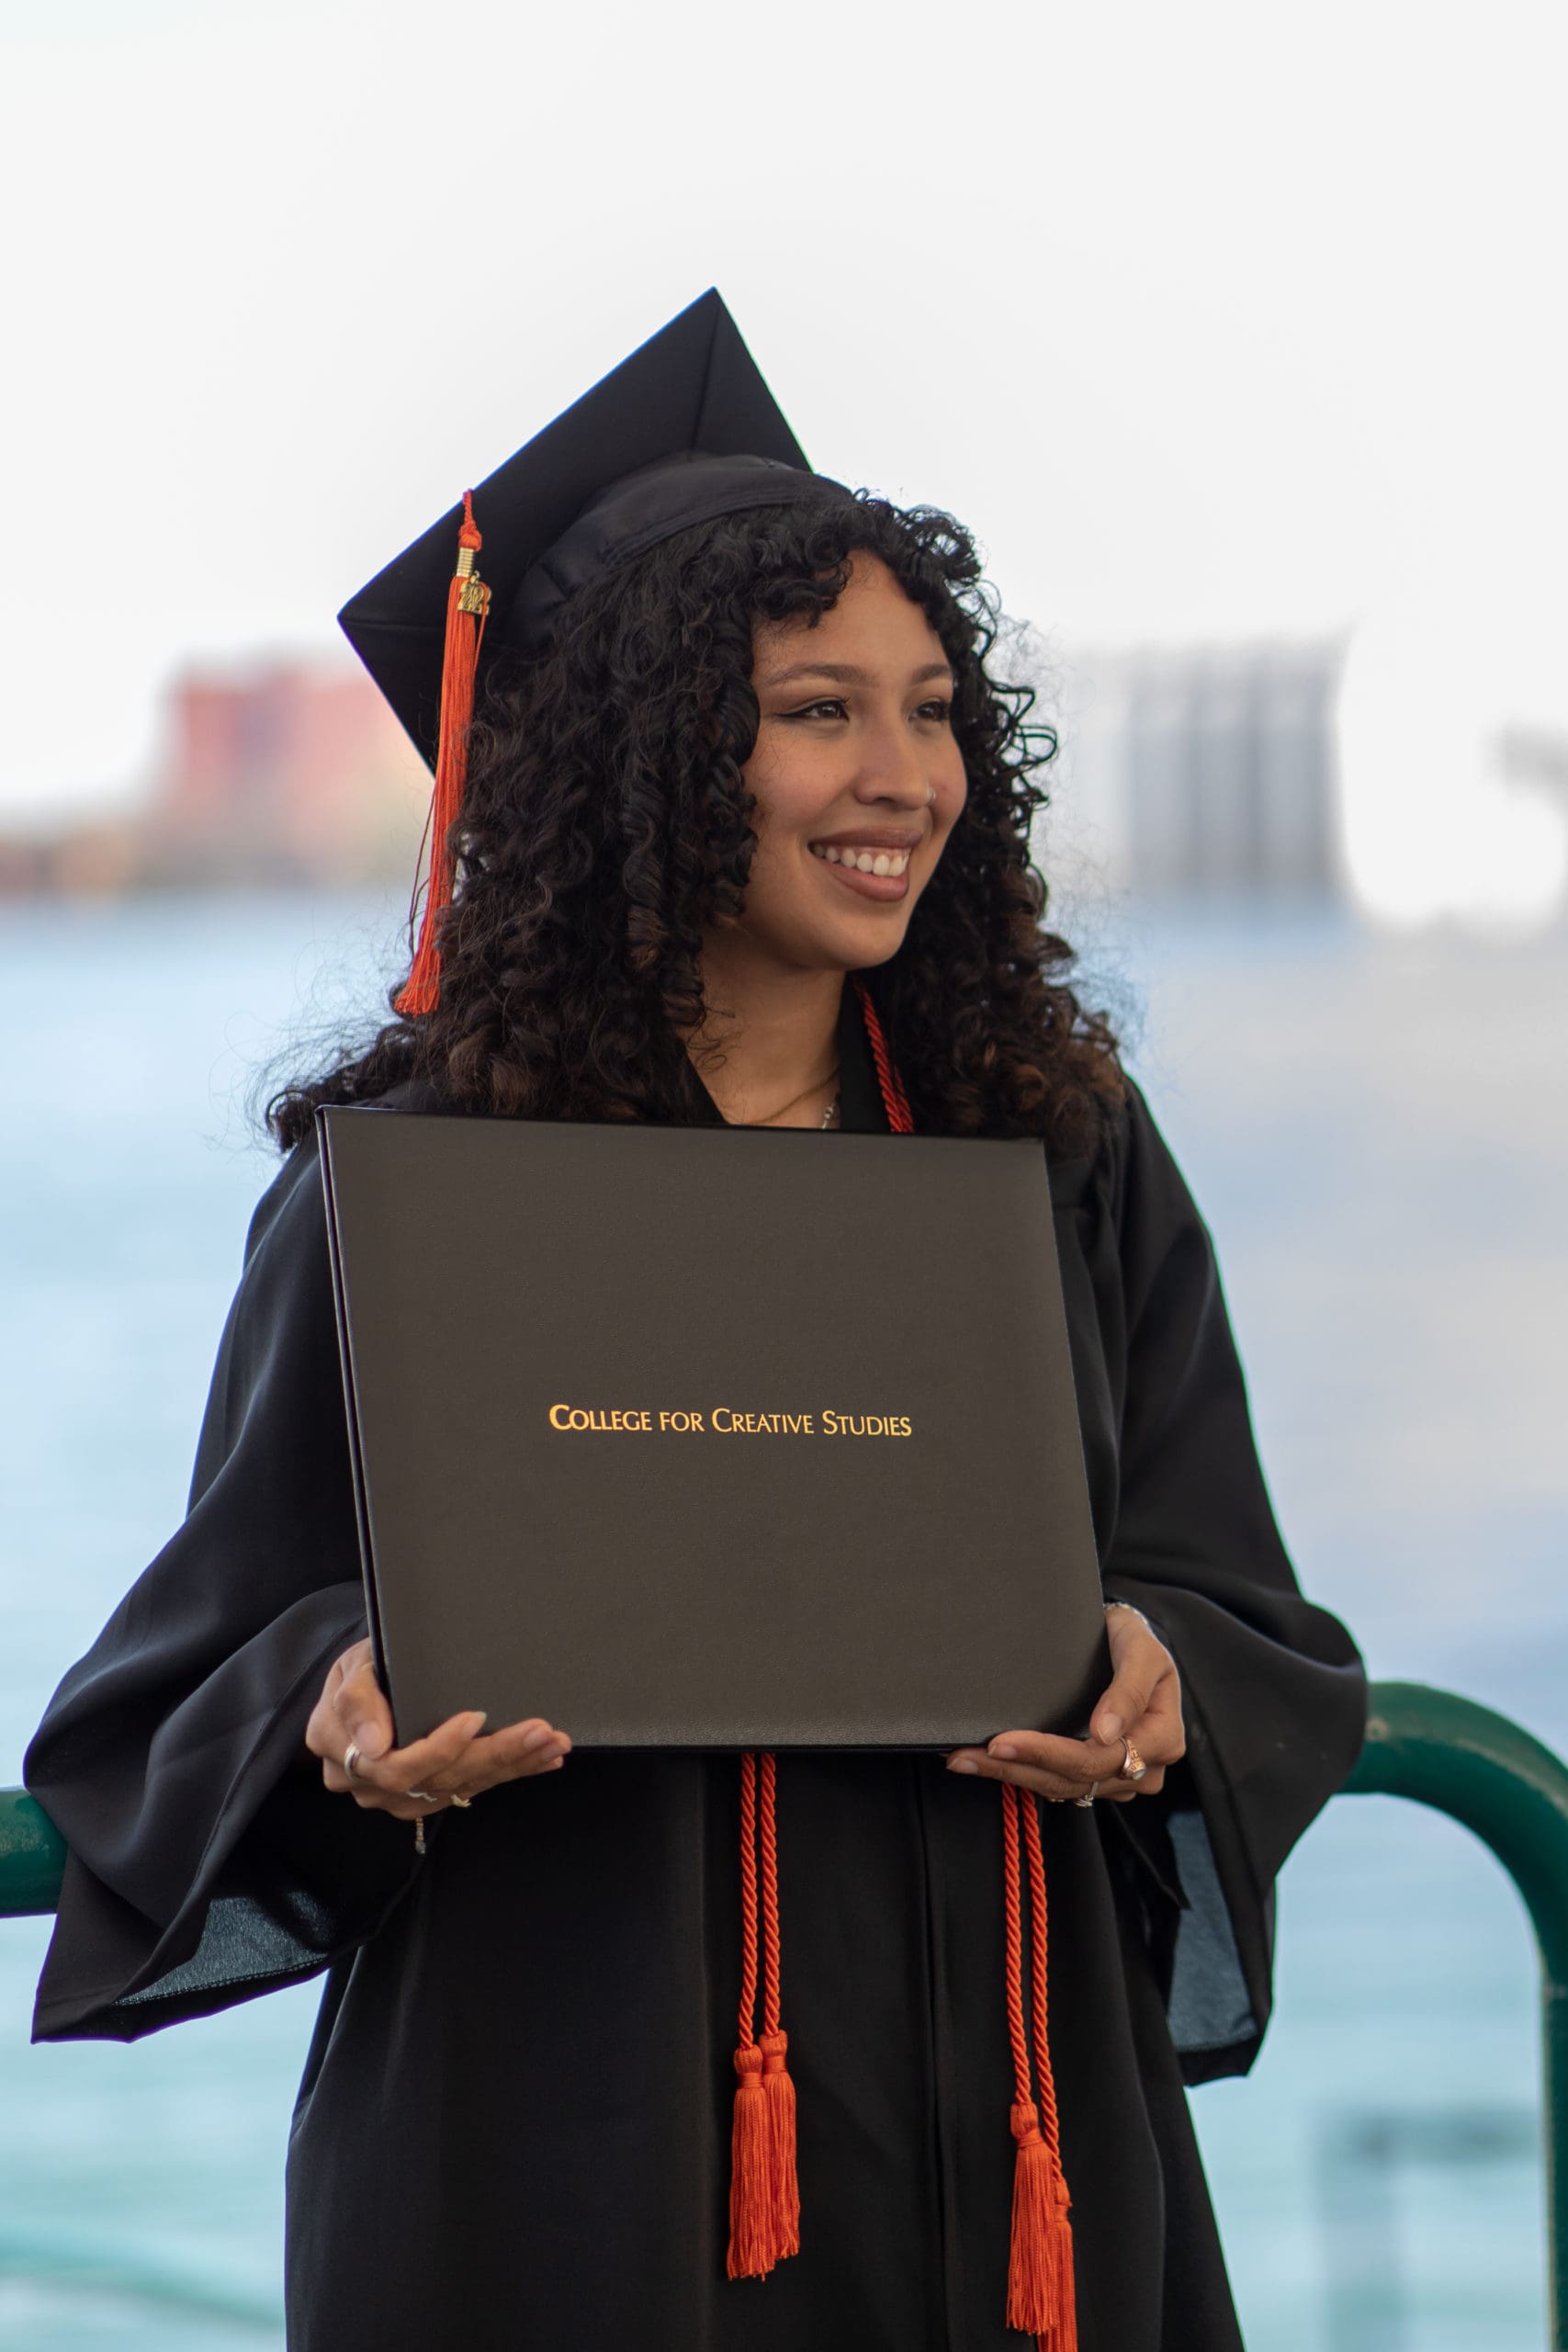 A graduating student with orange cords smiles for a photo and poses with their diploma.